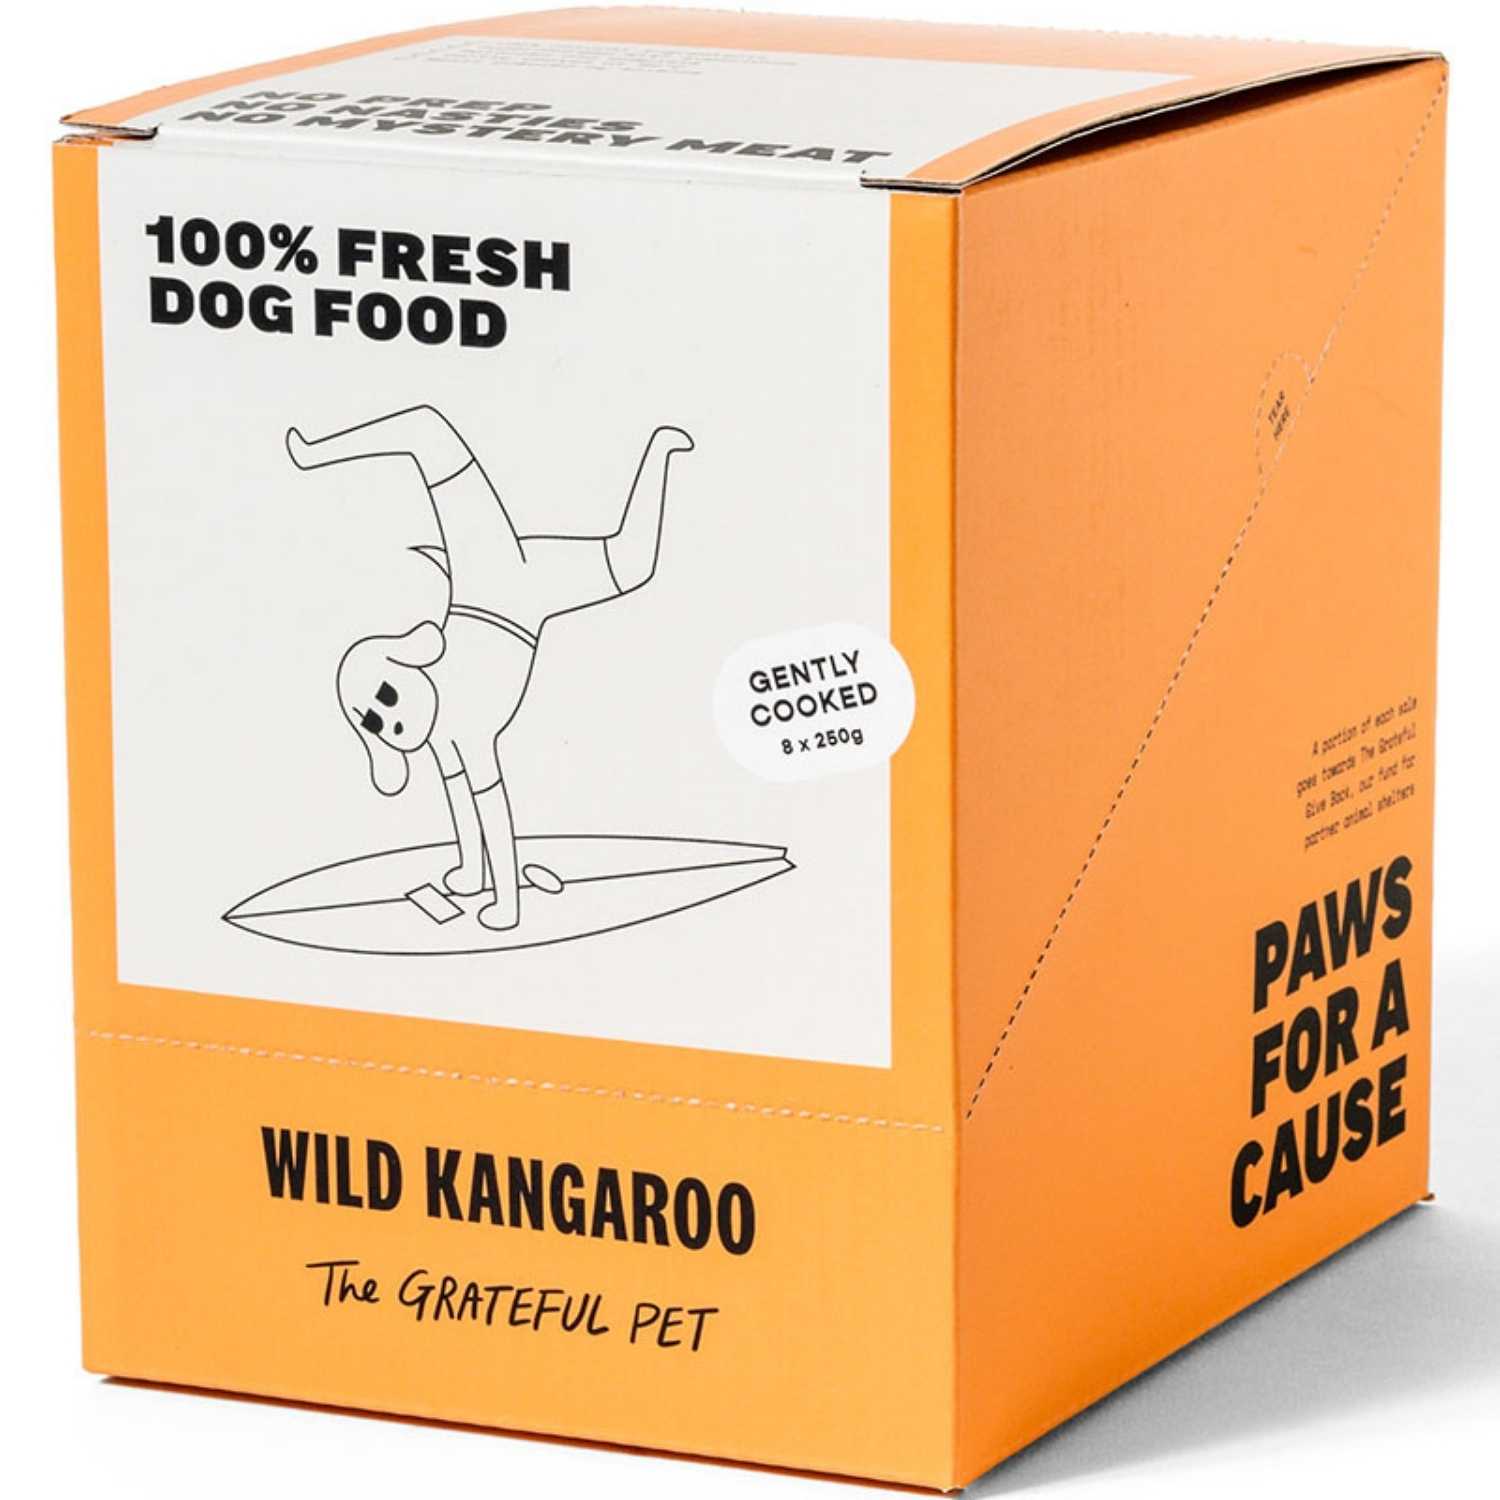 The Grateful Pet - Gently Cooked (Wild Kangaroo) - Dog (8 x 250g Pouch) Food (Case)